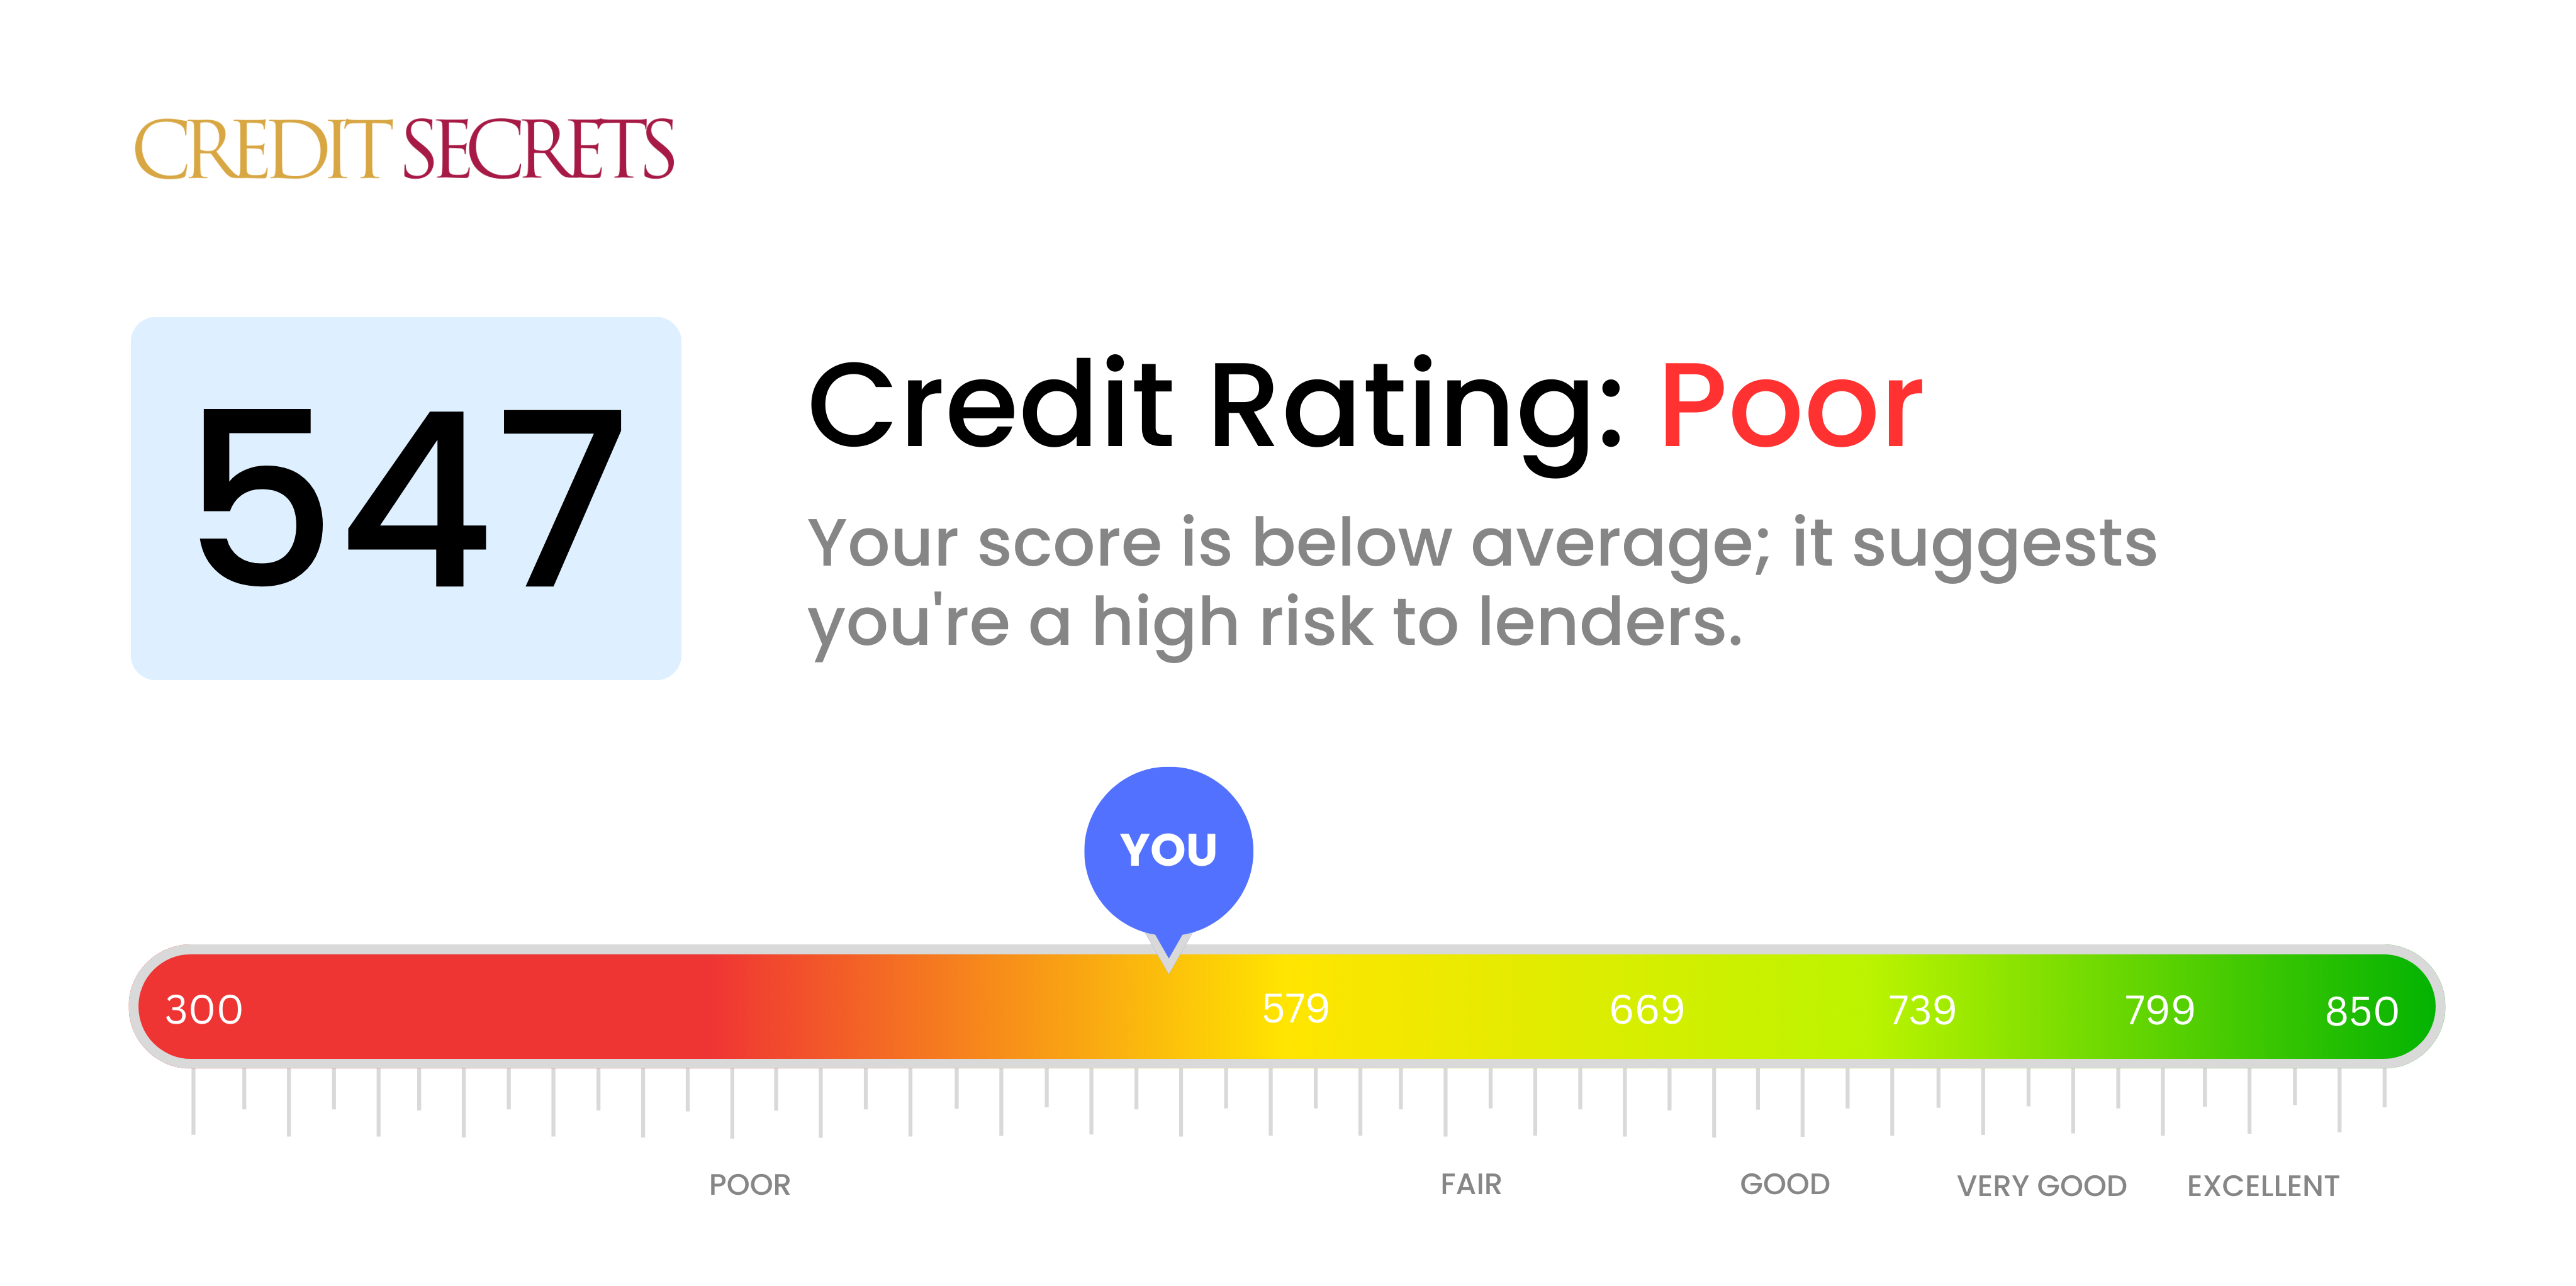 Is 547 a good credit score?